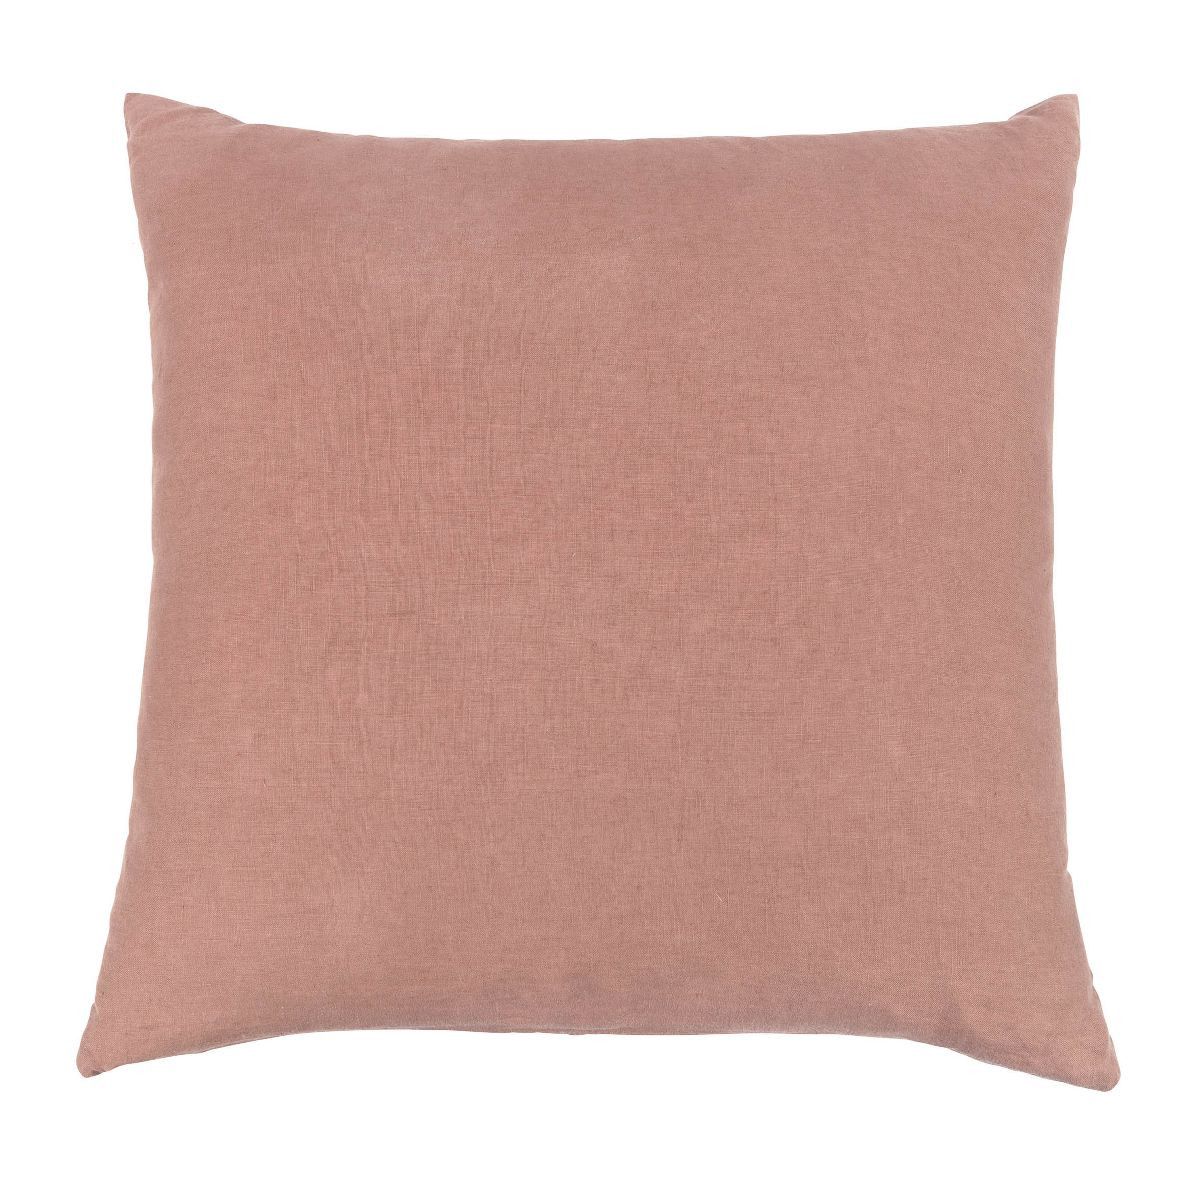 26" x 26" Euro French Linen Throw Pillow with Removable Sham | BOKSER HOME | Target